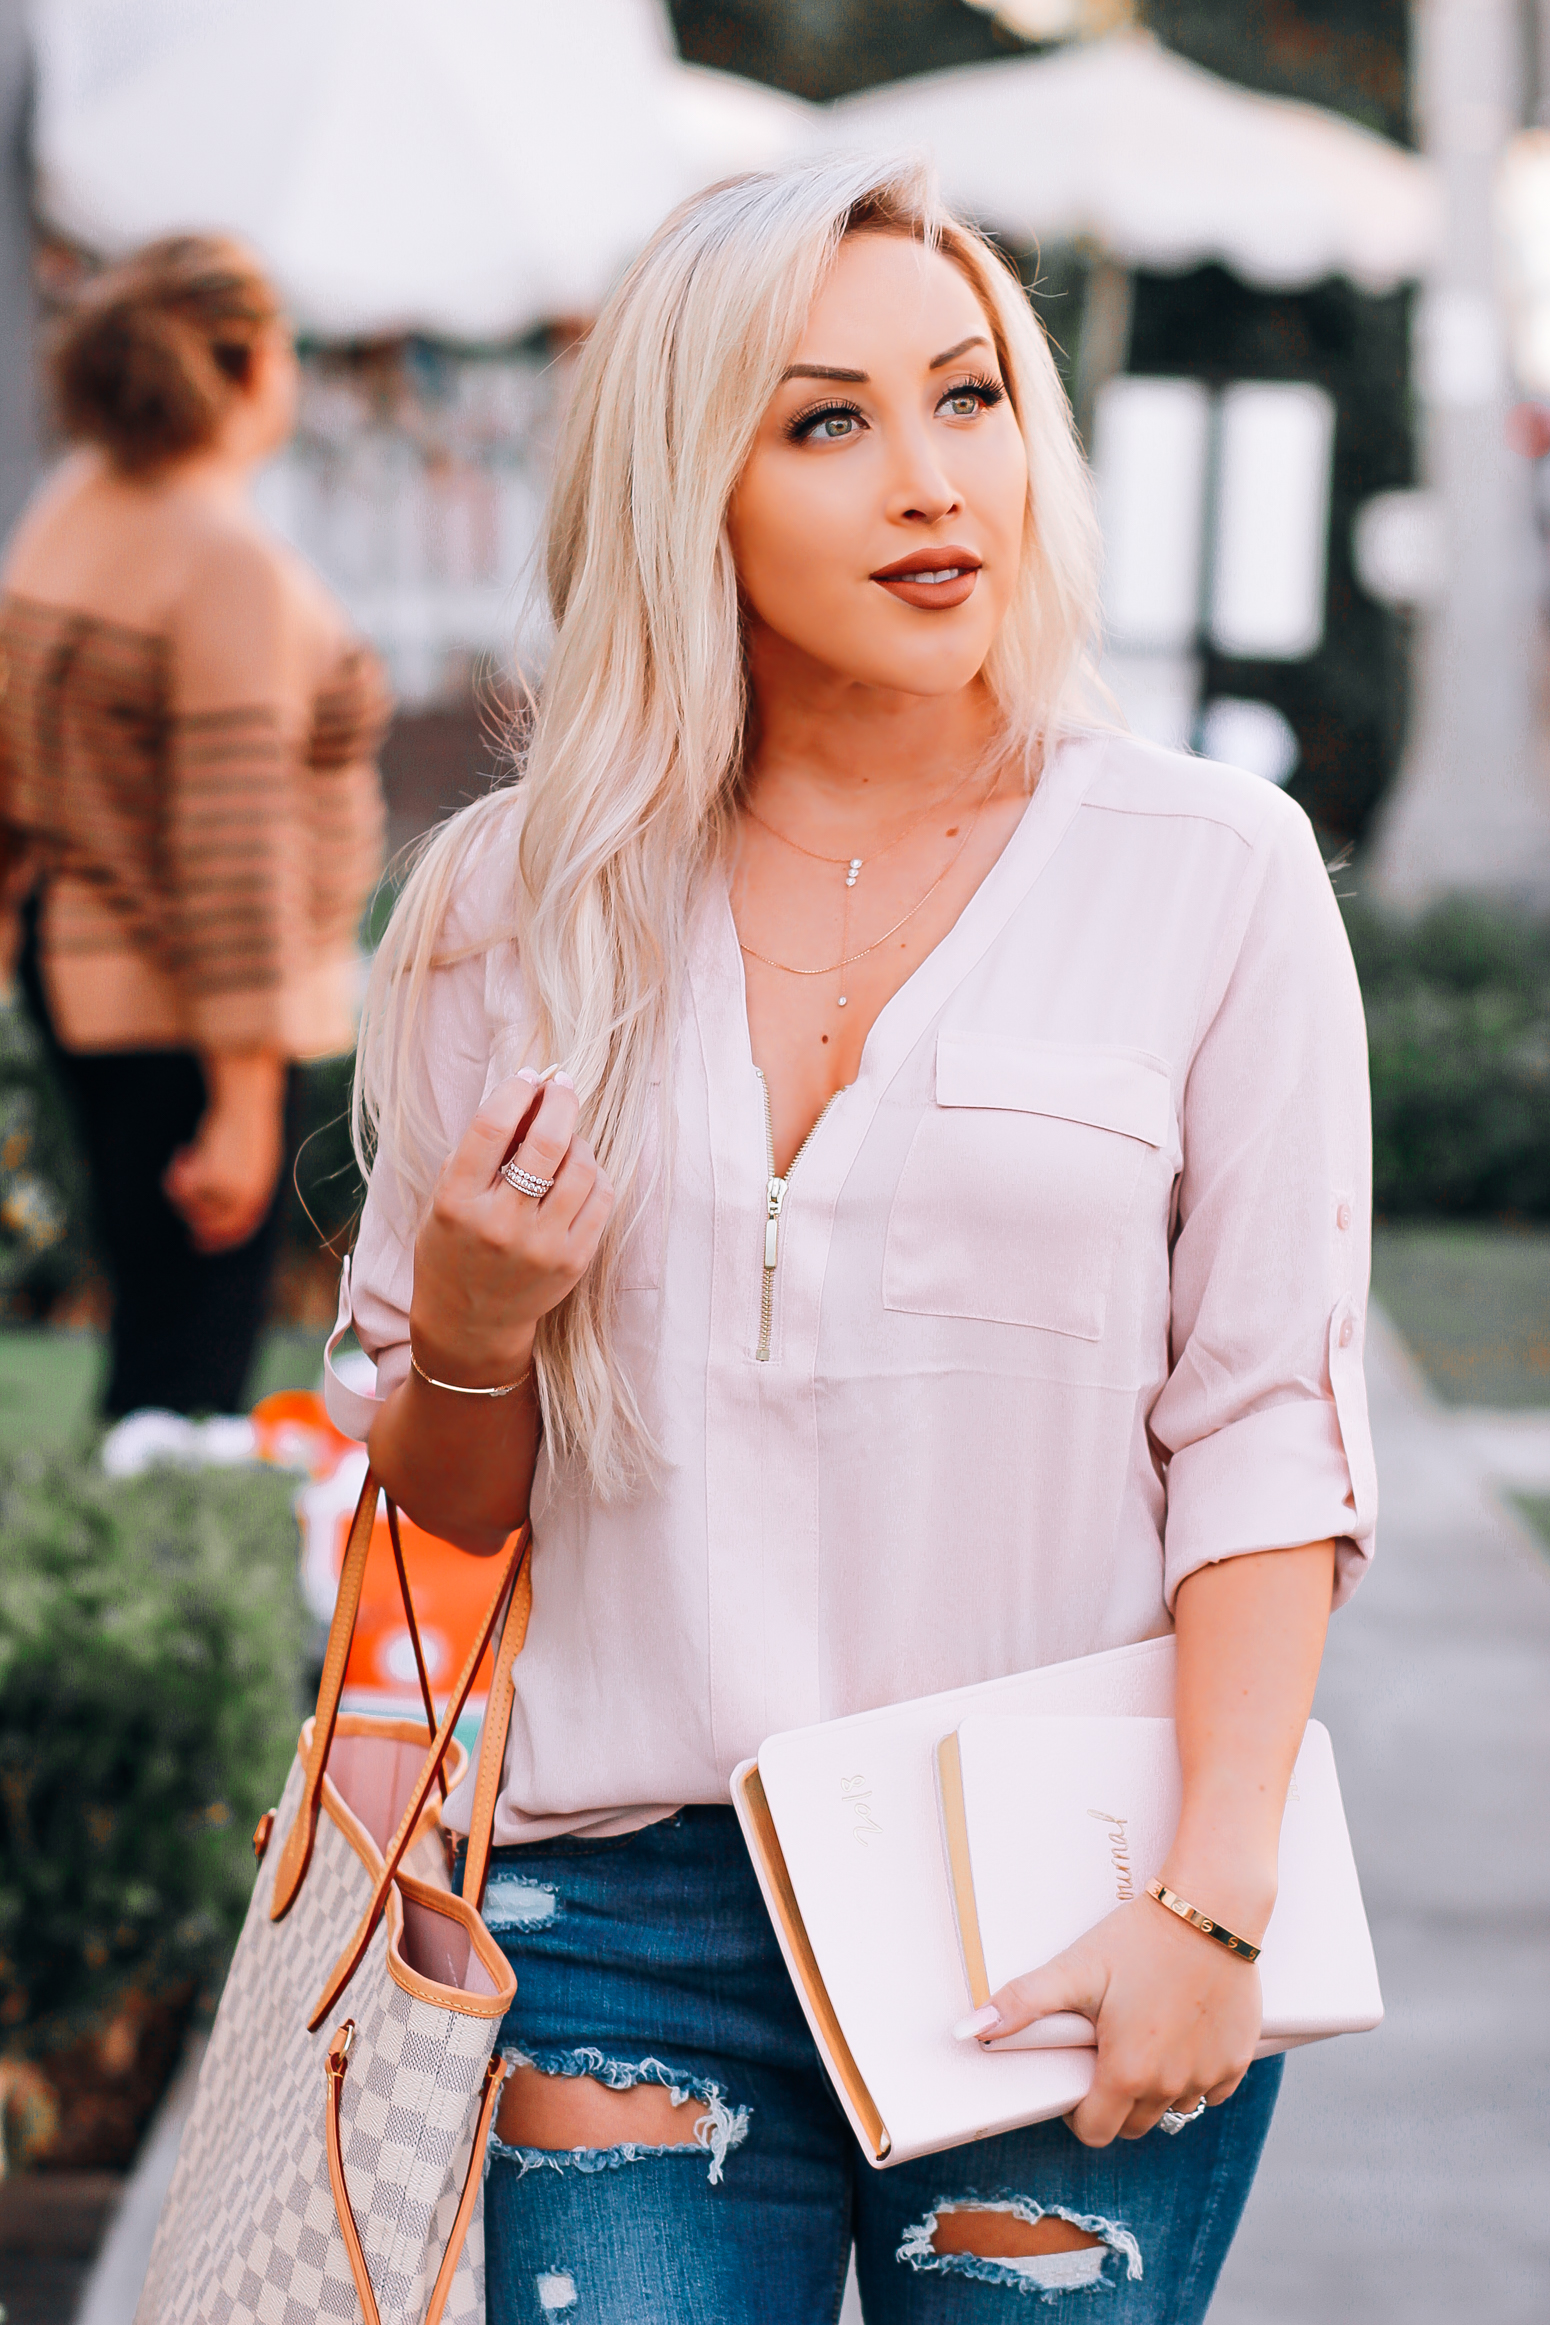 Blondie in the City | Casual Style | The Prettiest Pink Journal & 2018 Agenda